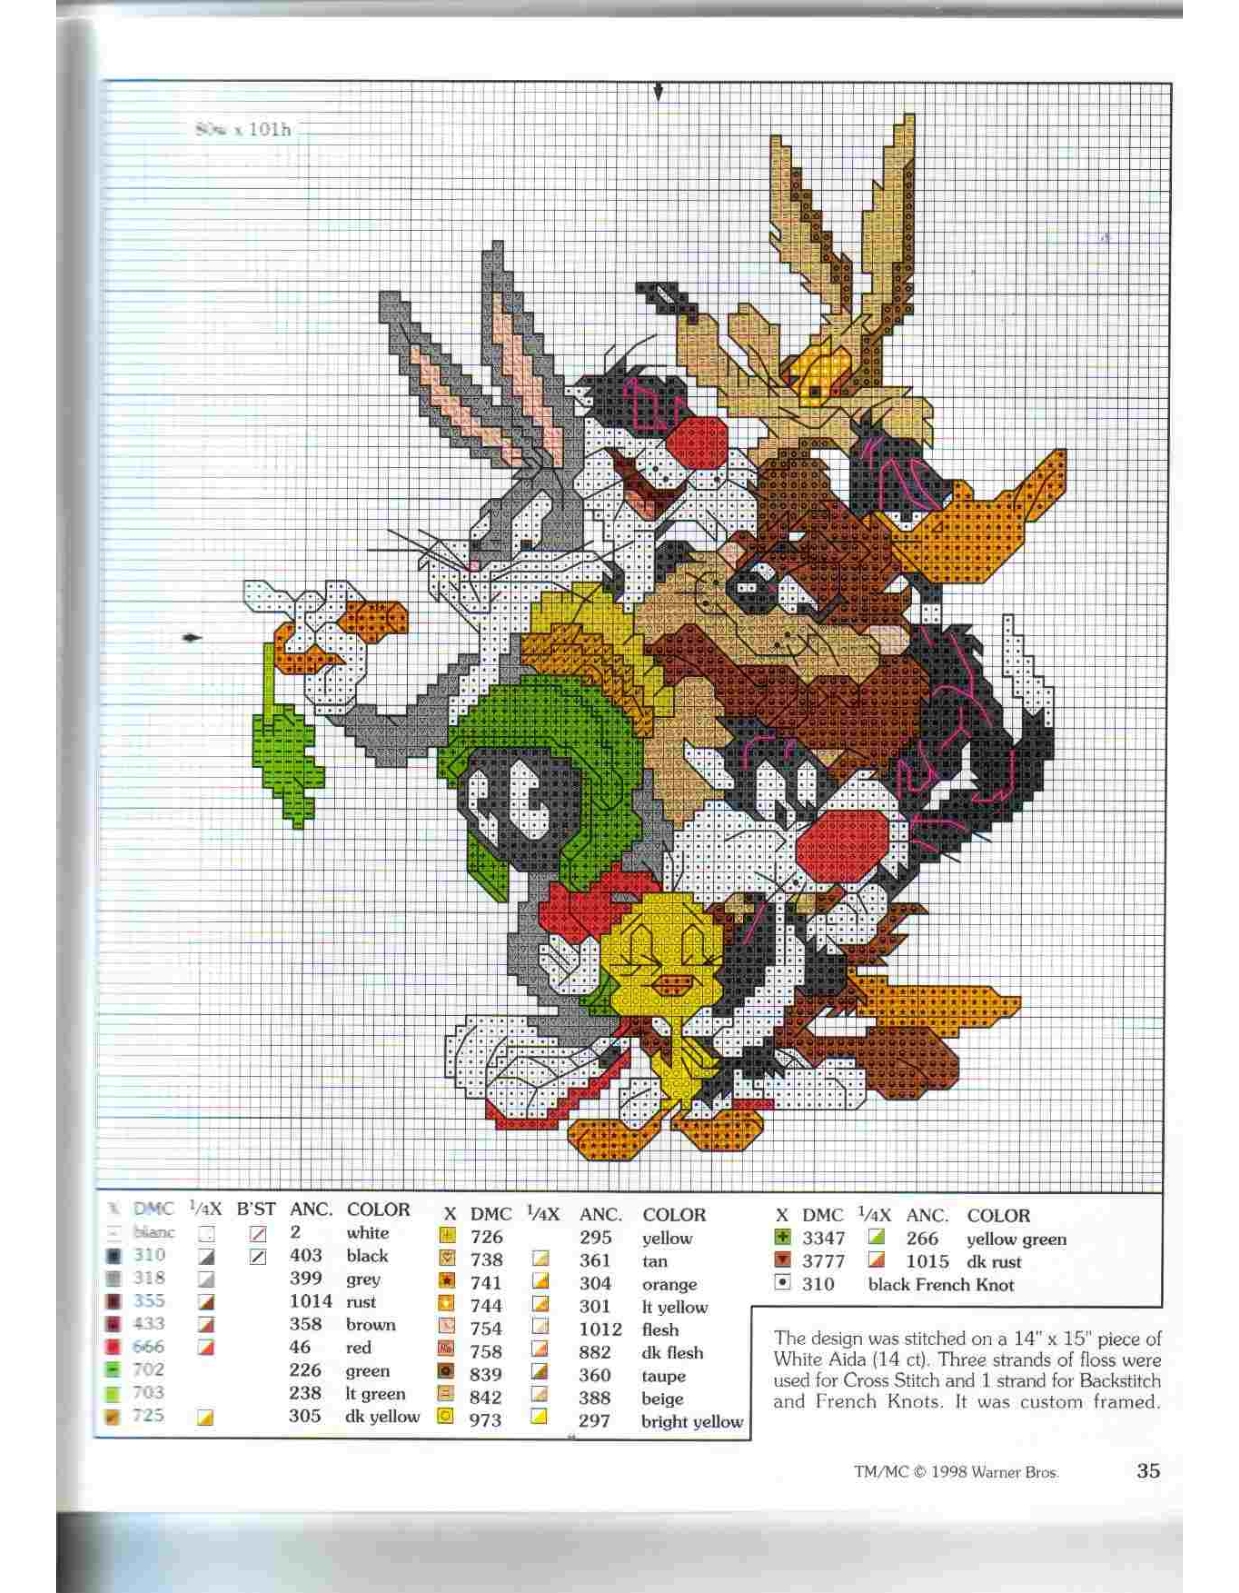 Looney Tunes characters cross stitch patterns